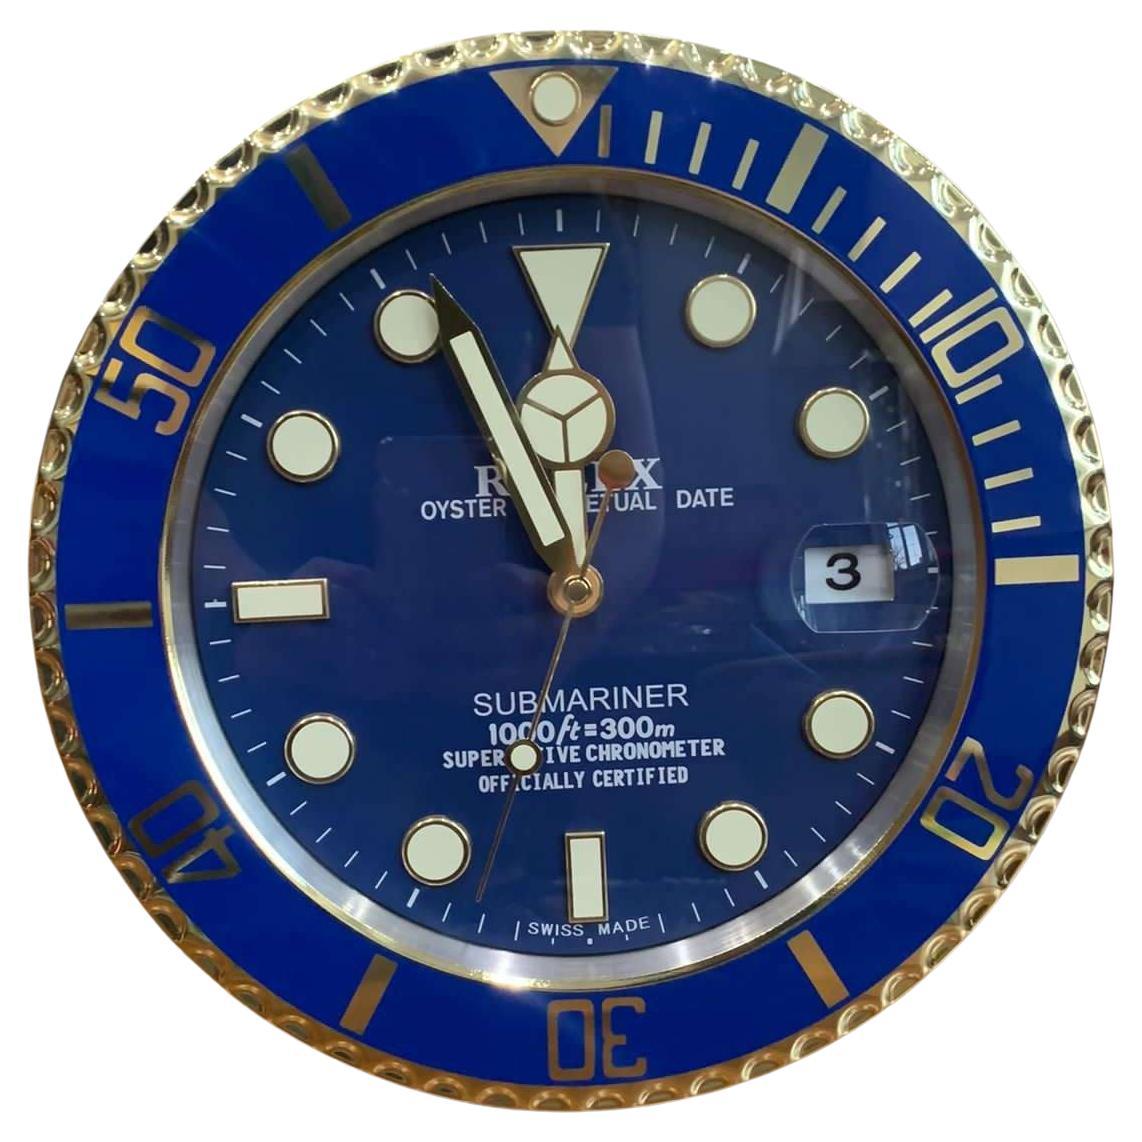 ROLEX Officially Certified Oyster Perpetual Submariner Blue & Gold Wall Clock  For Sale